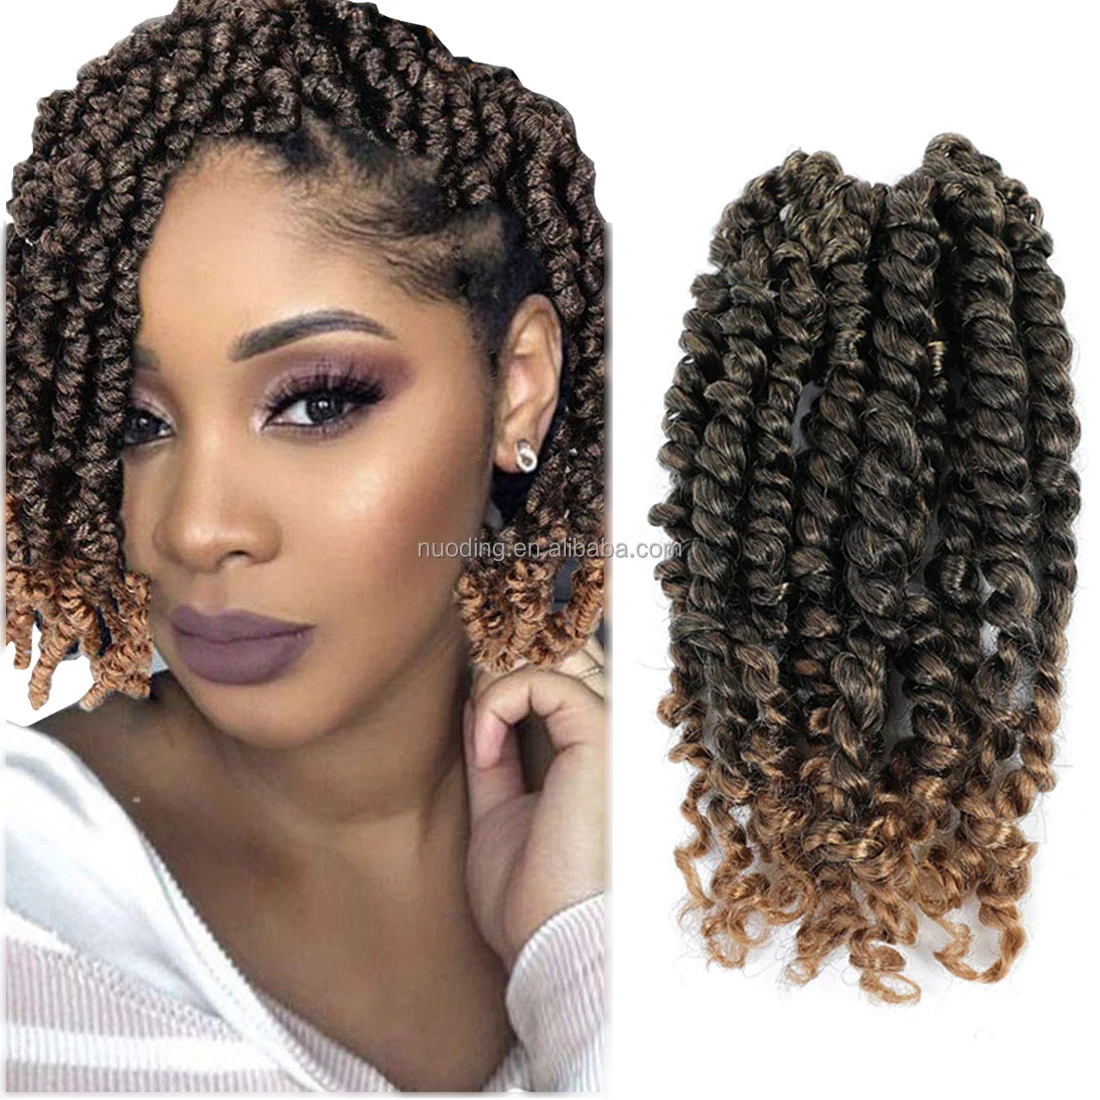 

Wholesale 10inch pre twisted passion twist hair colorful ombre curly ends crochet premium low temperature kanekalons fiber braid, 1b#,1b/27#,1b/30#,1b/bug#